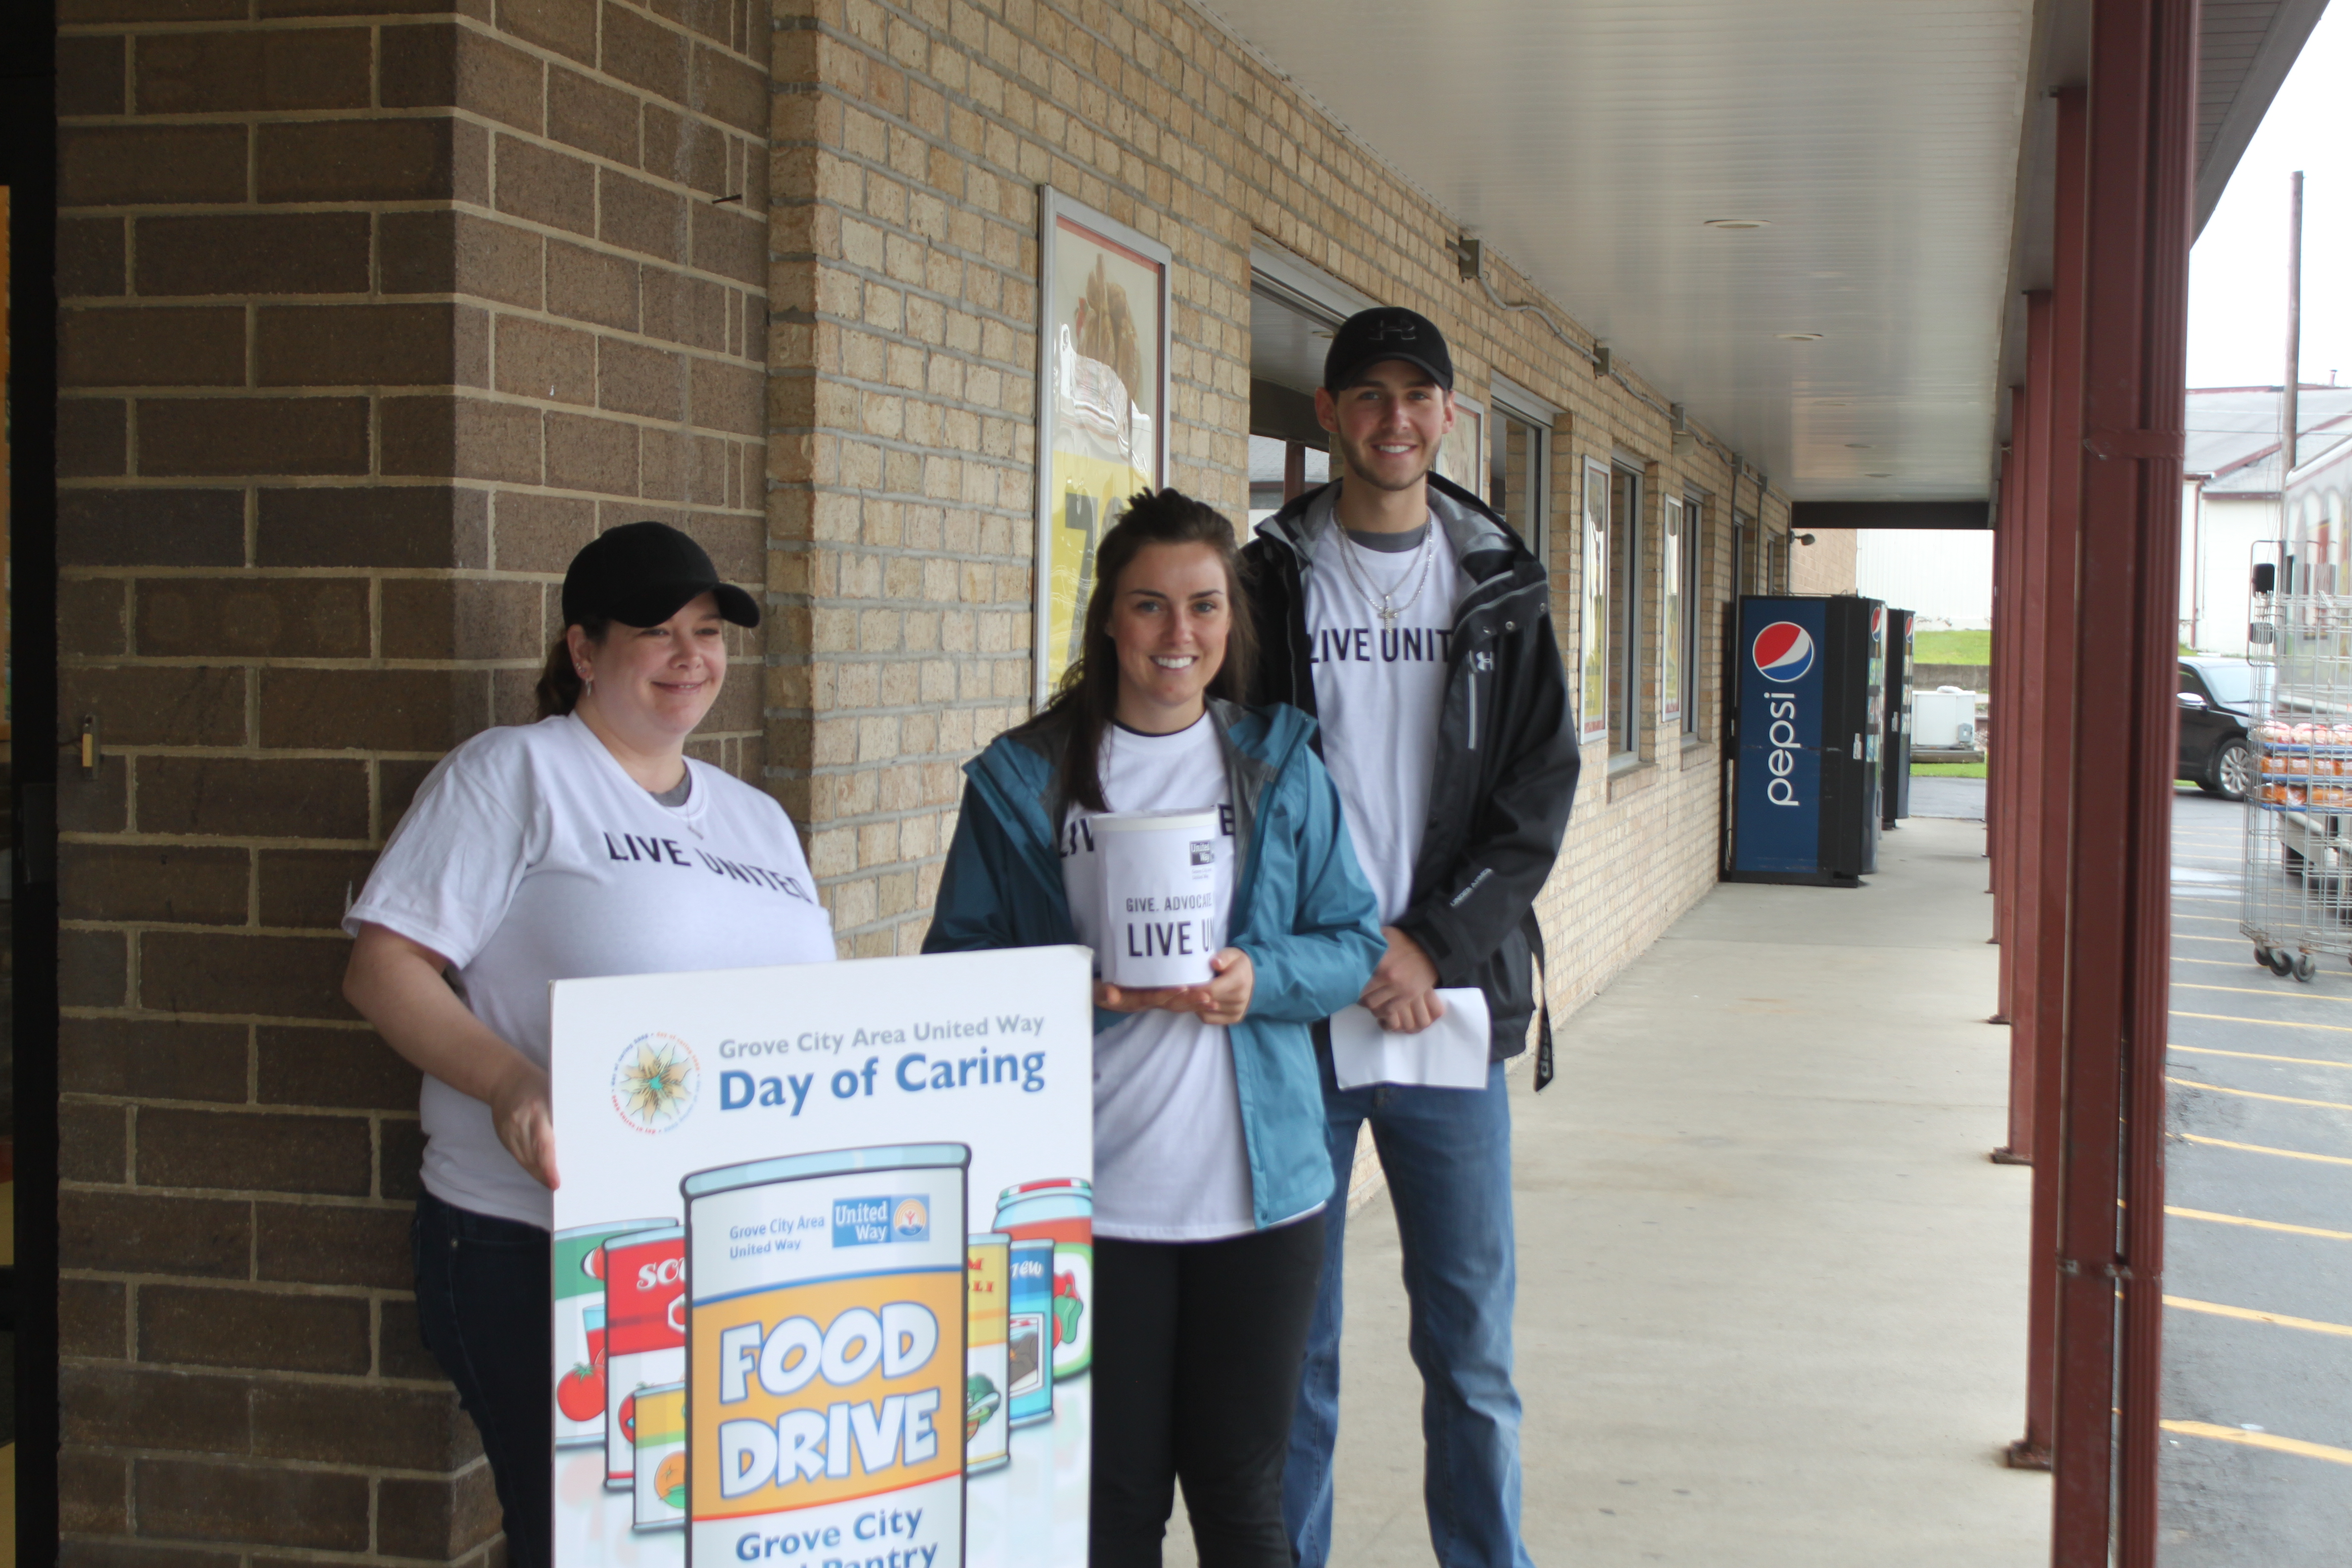 The North Face employees helped with a food drive to benefit the GC Community Food Pantry